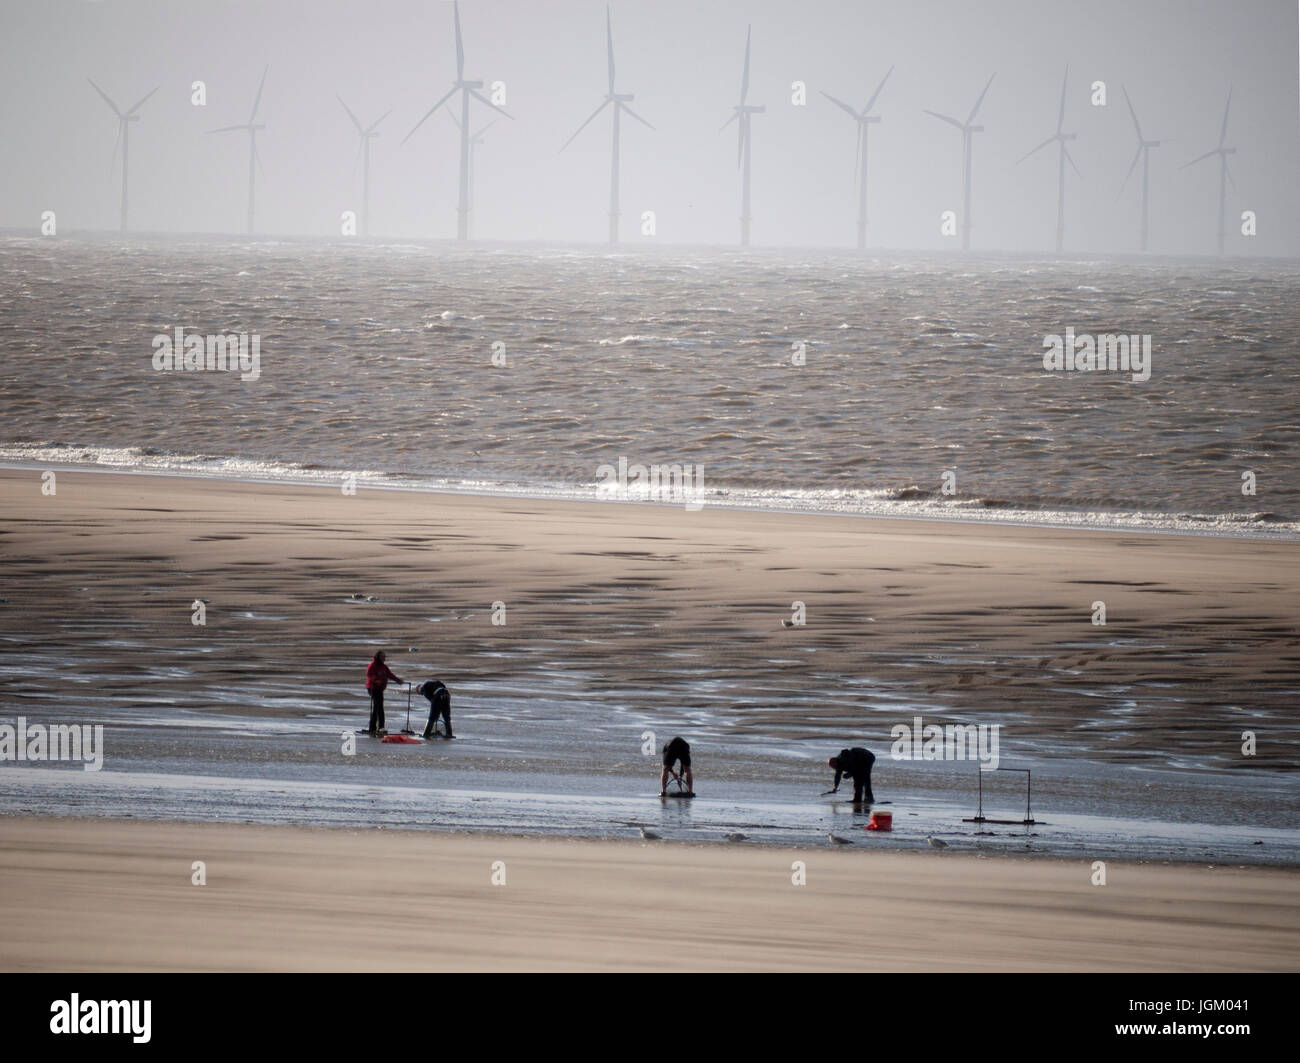 Cockle fishermen dig for cockles on the beach at New Brighton, Wirral, Merseyside, against a backdrop of an offshore wind farm. Stock Photo